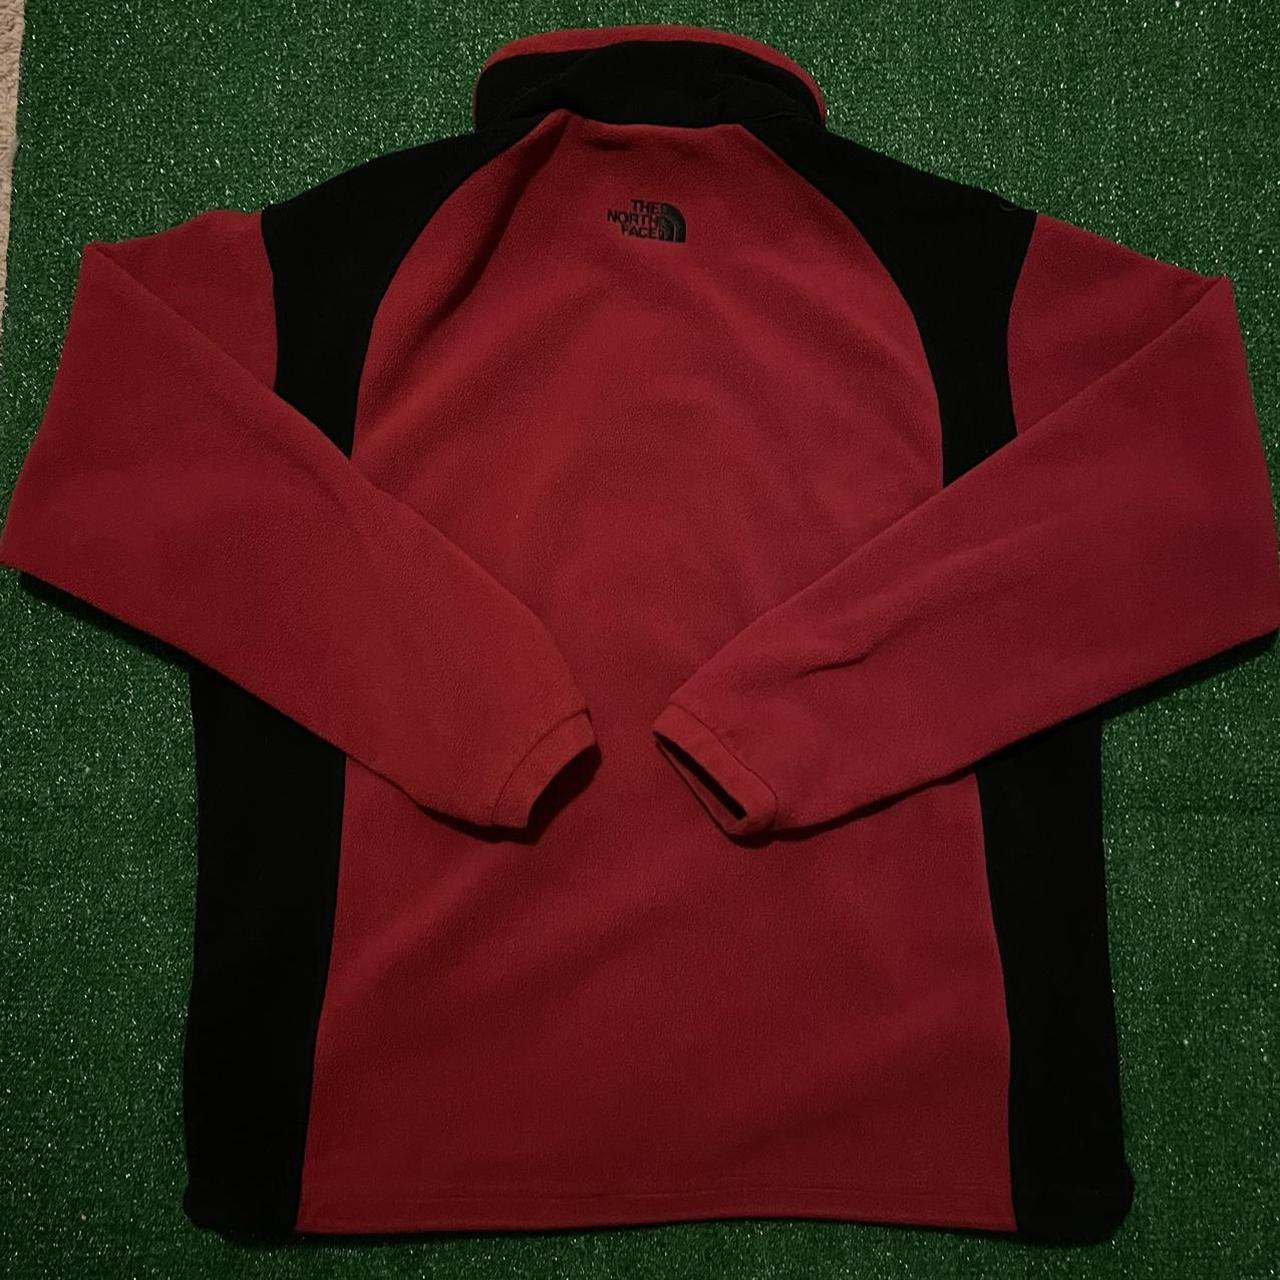 The North Face Men's Red and Black Jacket (3)